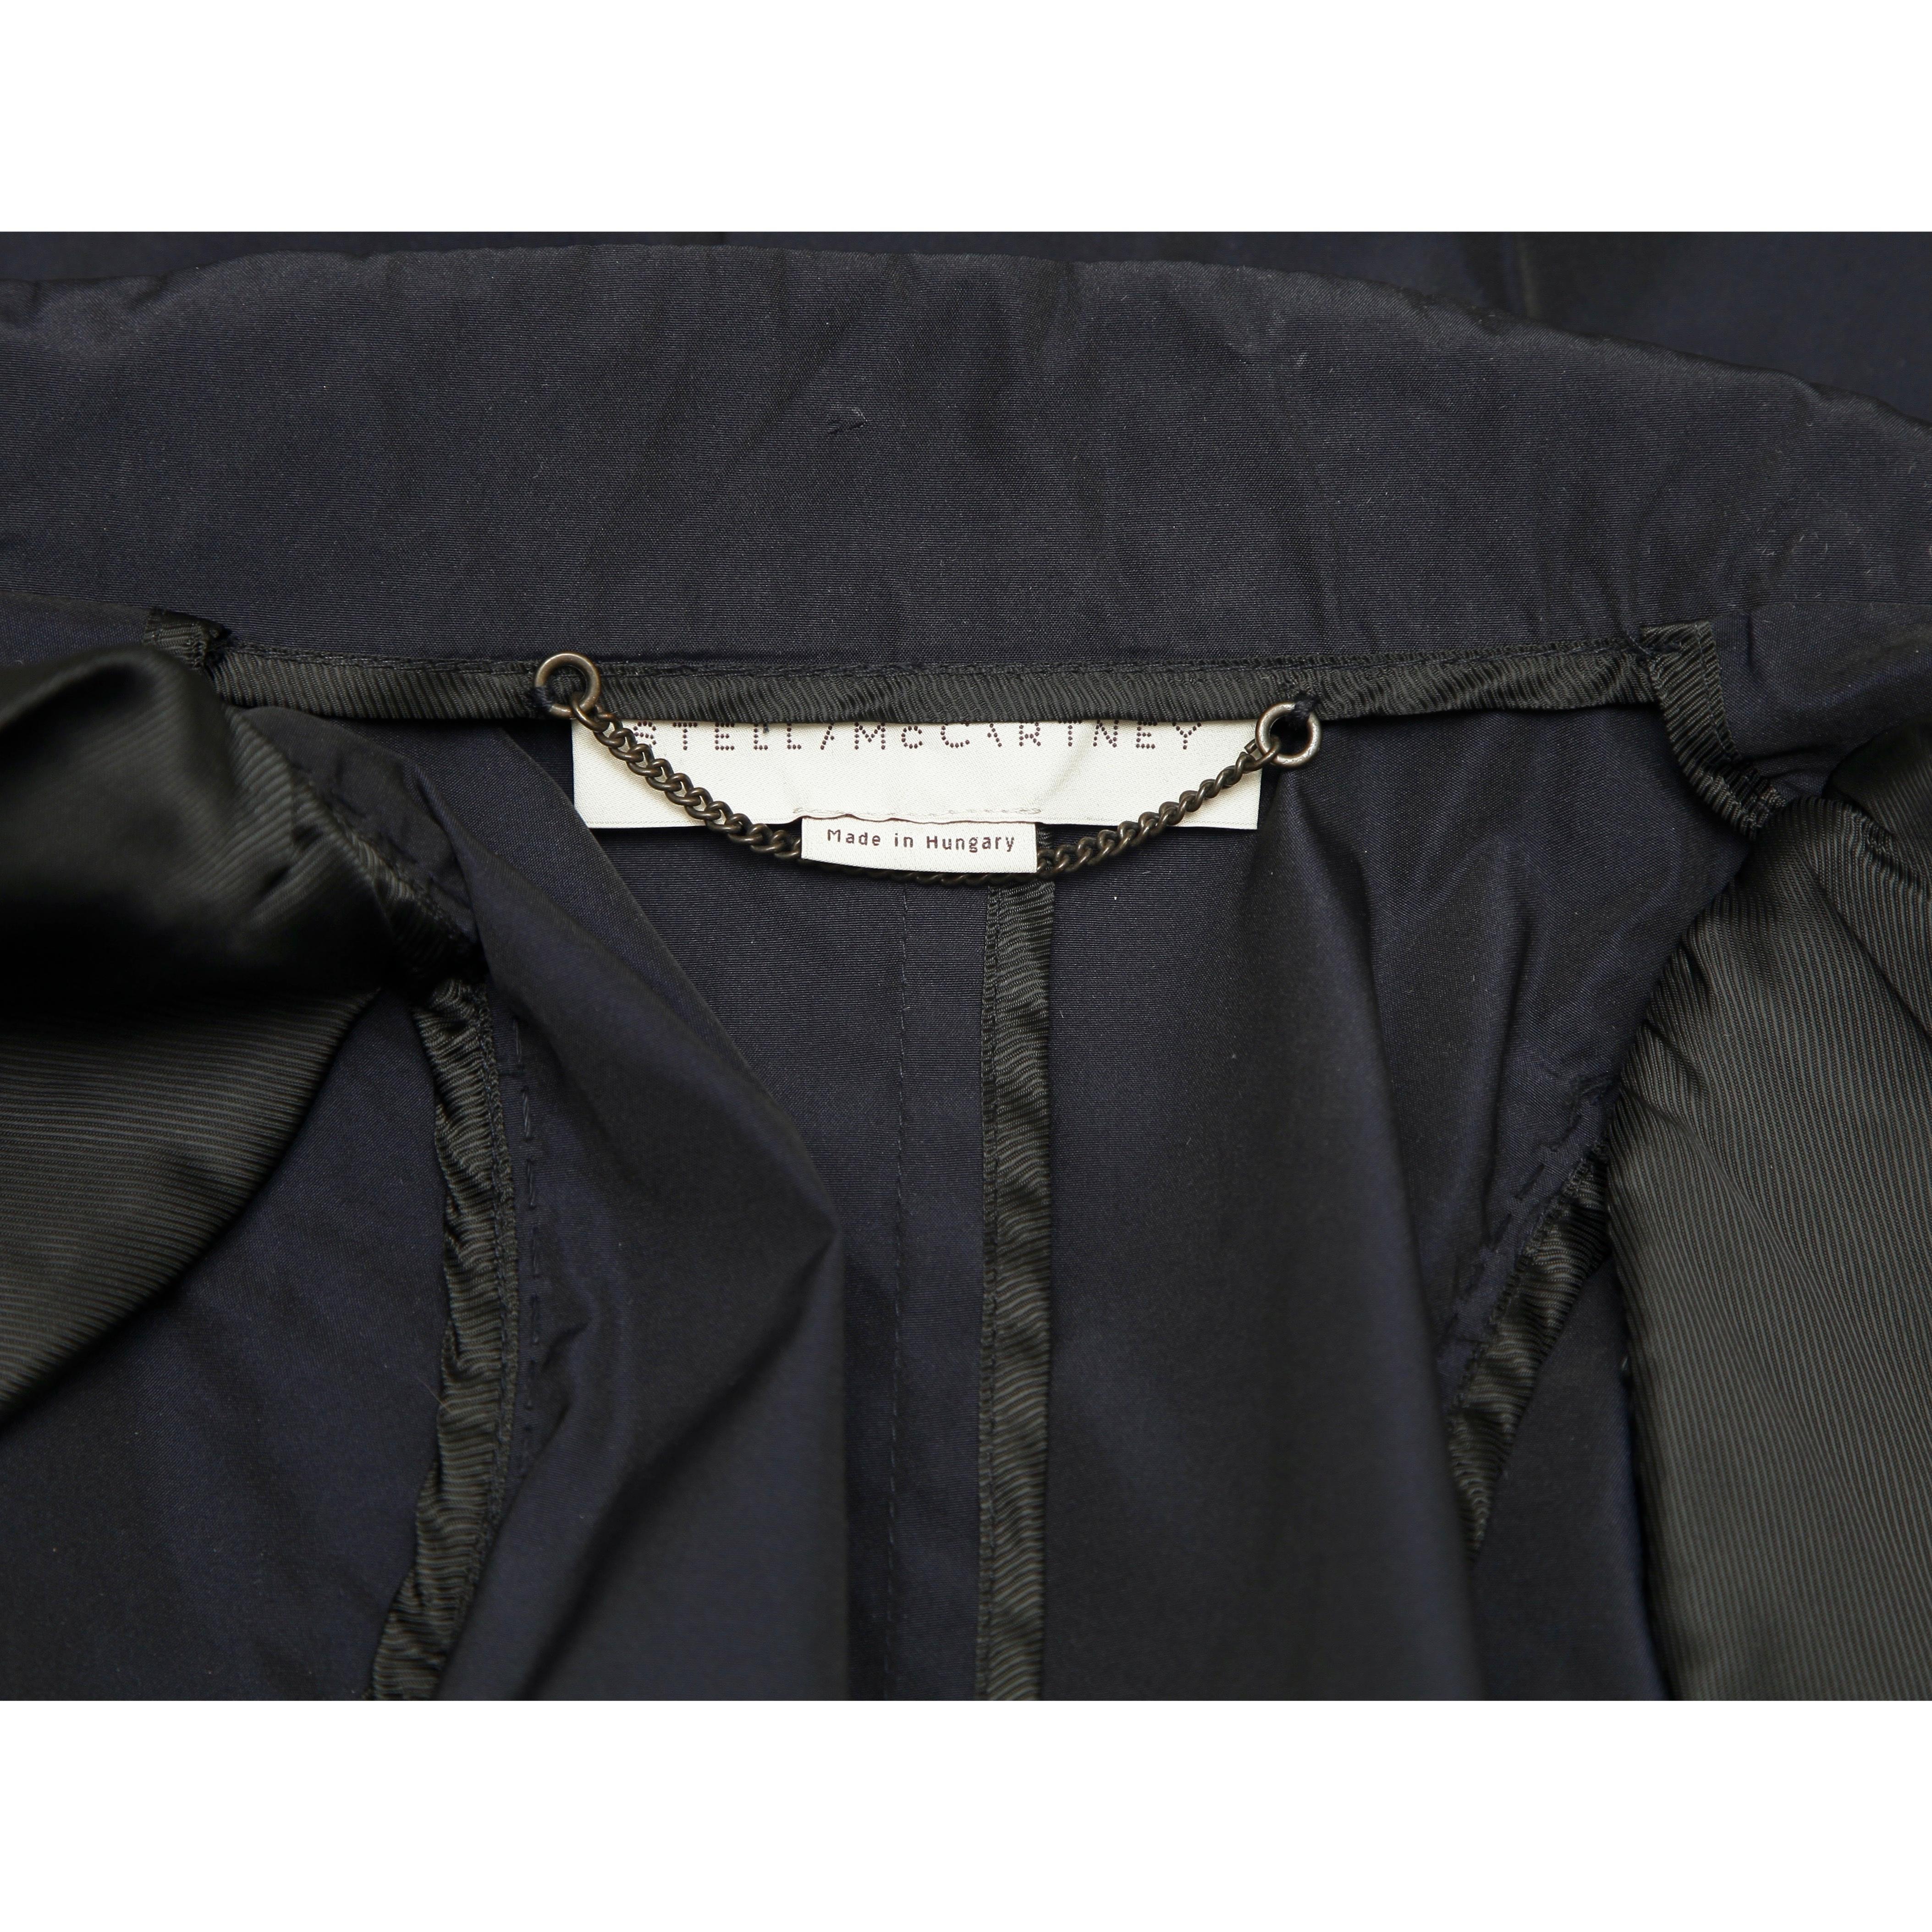 STELLA MCCARTNEY Trench Coat Navy Blue Buttons Mid-Length Belt Clothing Sz 38 For Sale 1